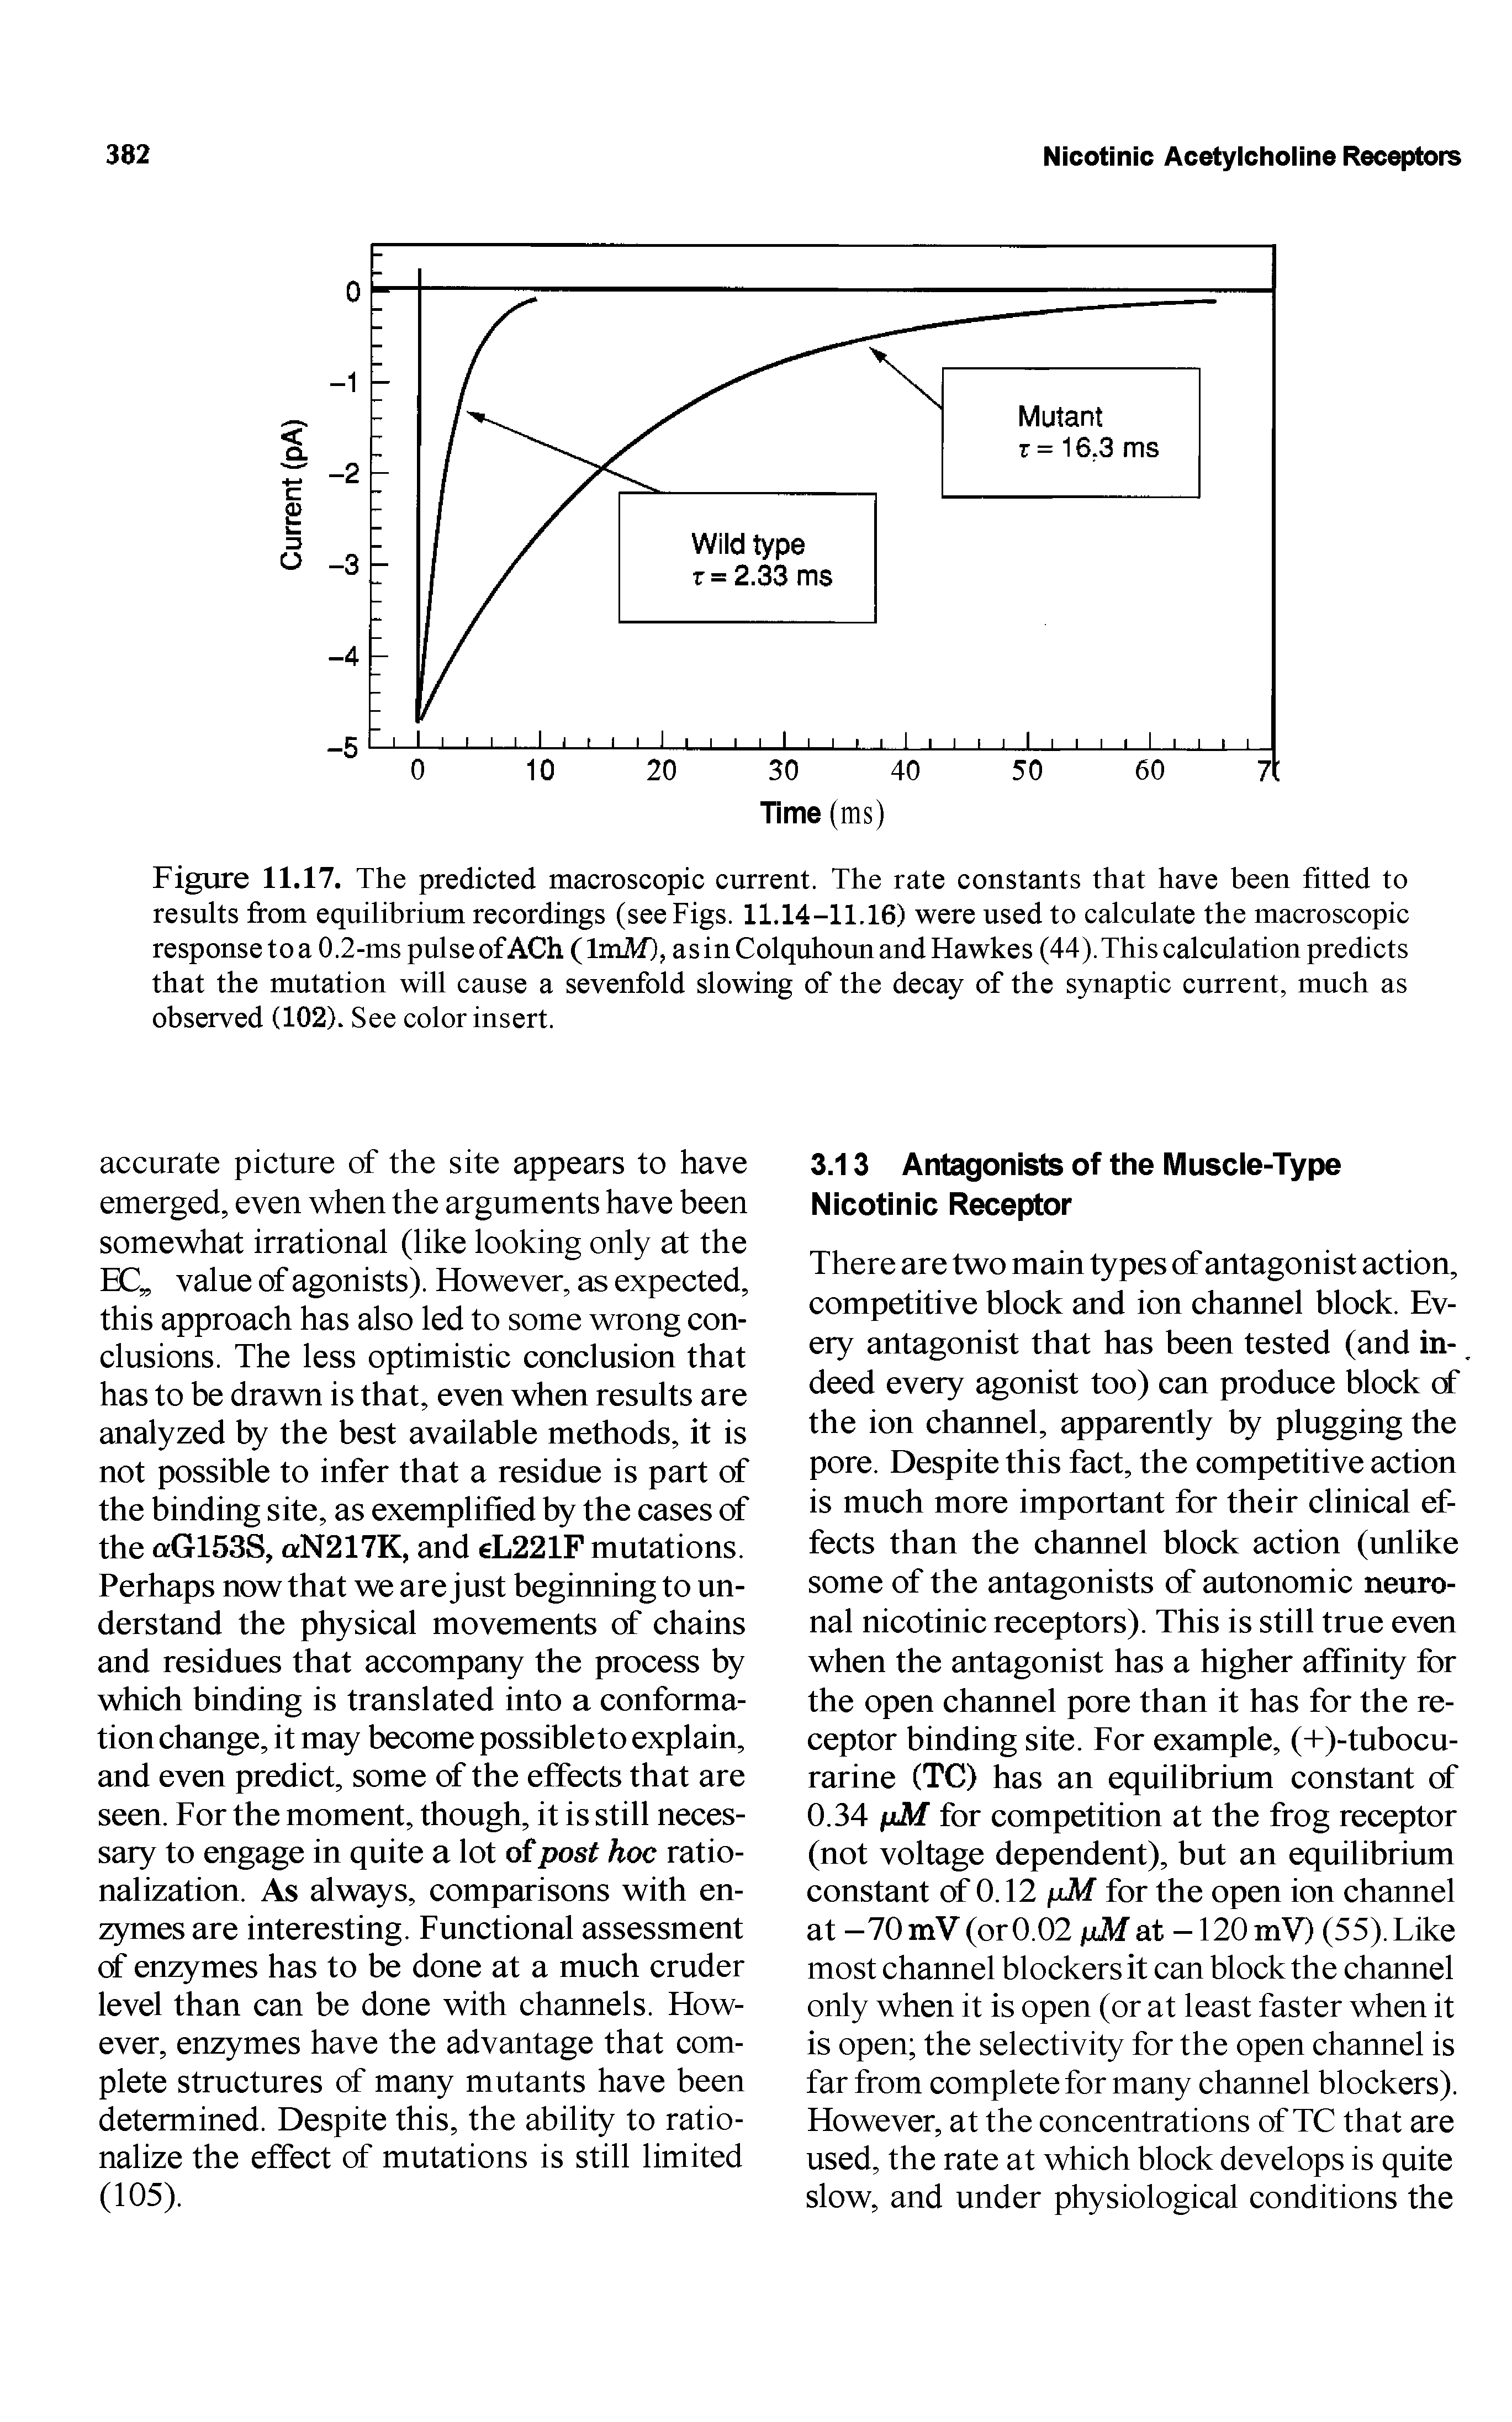 Figure 11.17. The predicted macroscopic current. The rate constants that have been fitted to results from equilibrium recordings (see Figs. 11.14-11.16) were used to calculate the macroscopic response to a 0.2-ms pulse of ACh (ImM), as in Colquhoun and Hawkes (44). This calculation predicts that the mutation will cause a sevenfold slowing of the decay of the synaptic current, much as observed (102). See color insert.